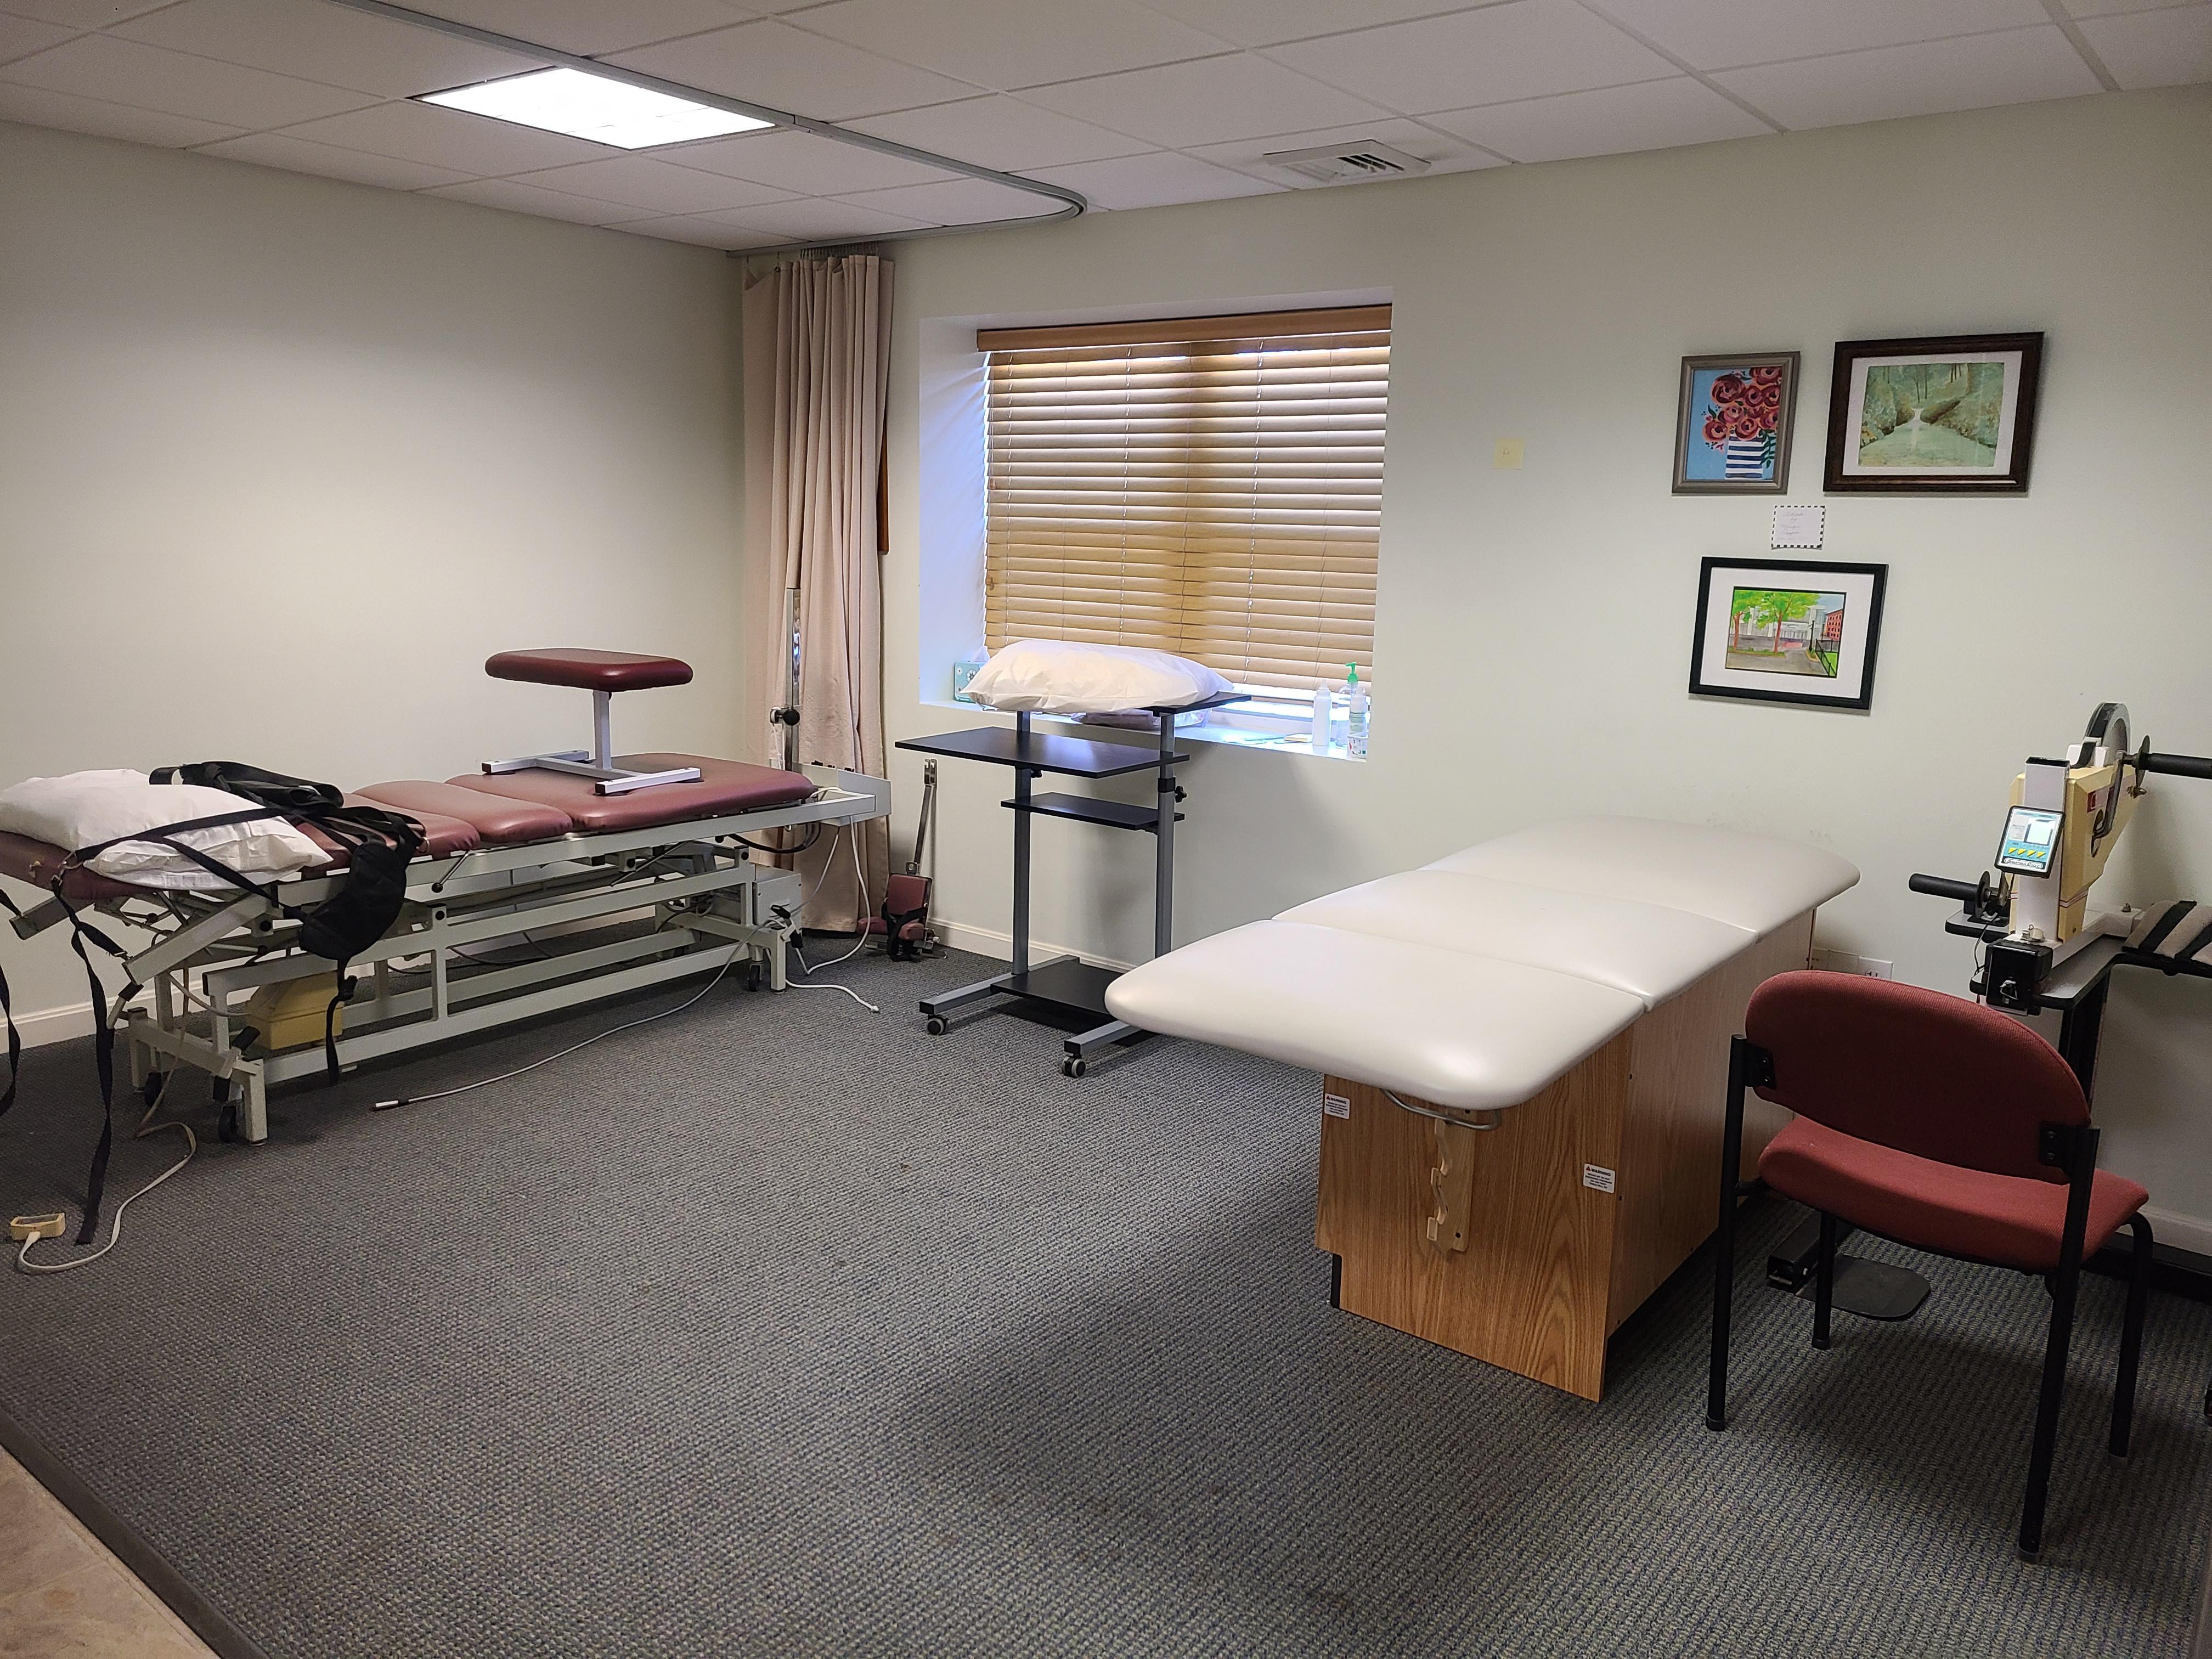 Image 7 | Bay State Physical Therapy